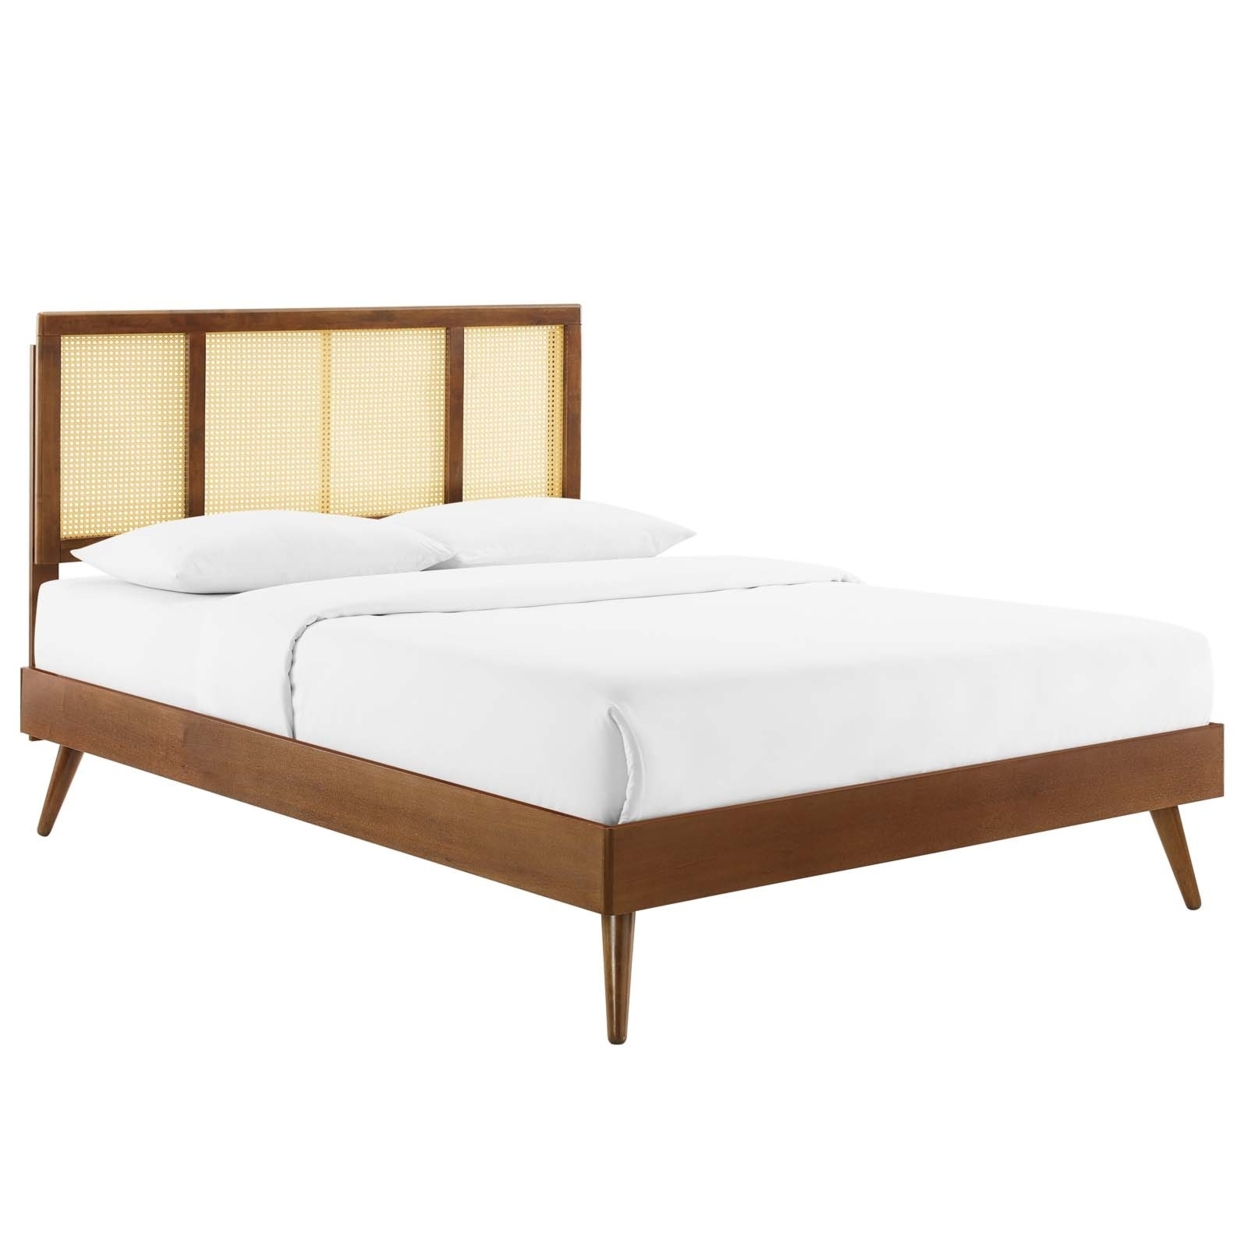 Kelsea Cane And Wood Full Platform Bed With Splayed Legs, Walnut